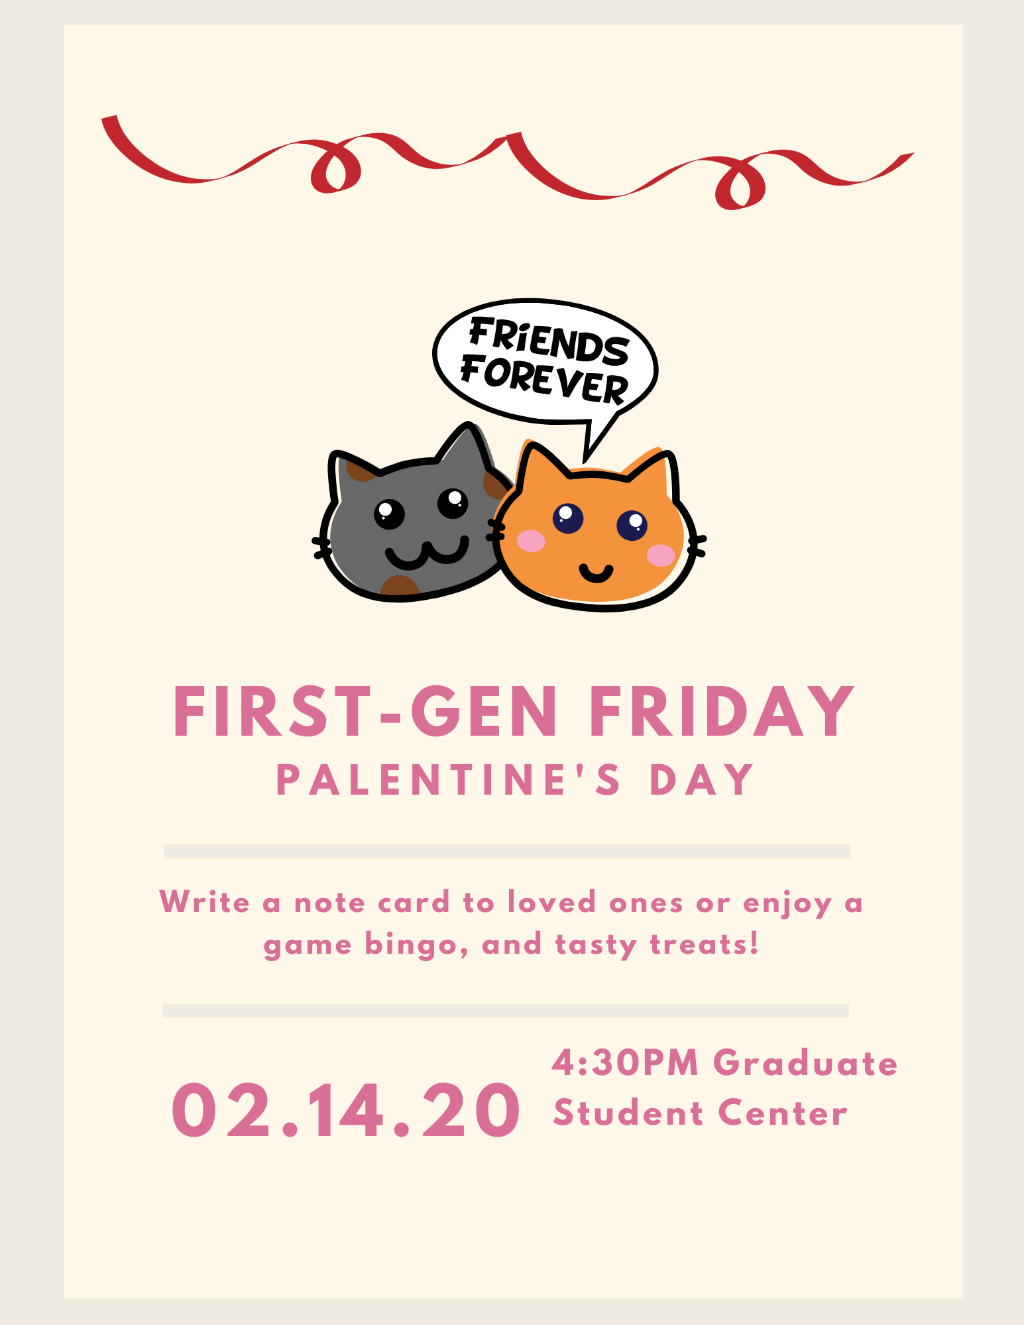 First-gen Friday February Palentines Event